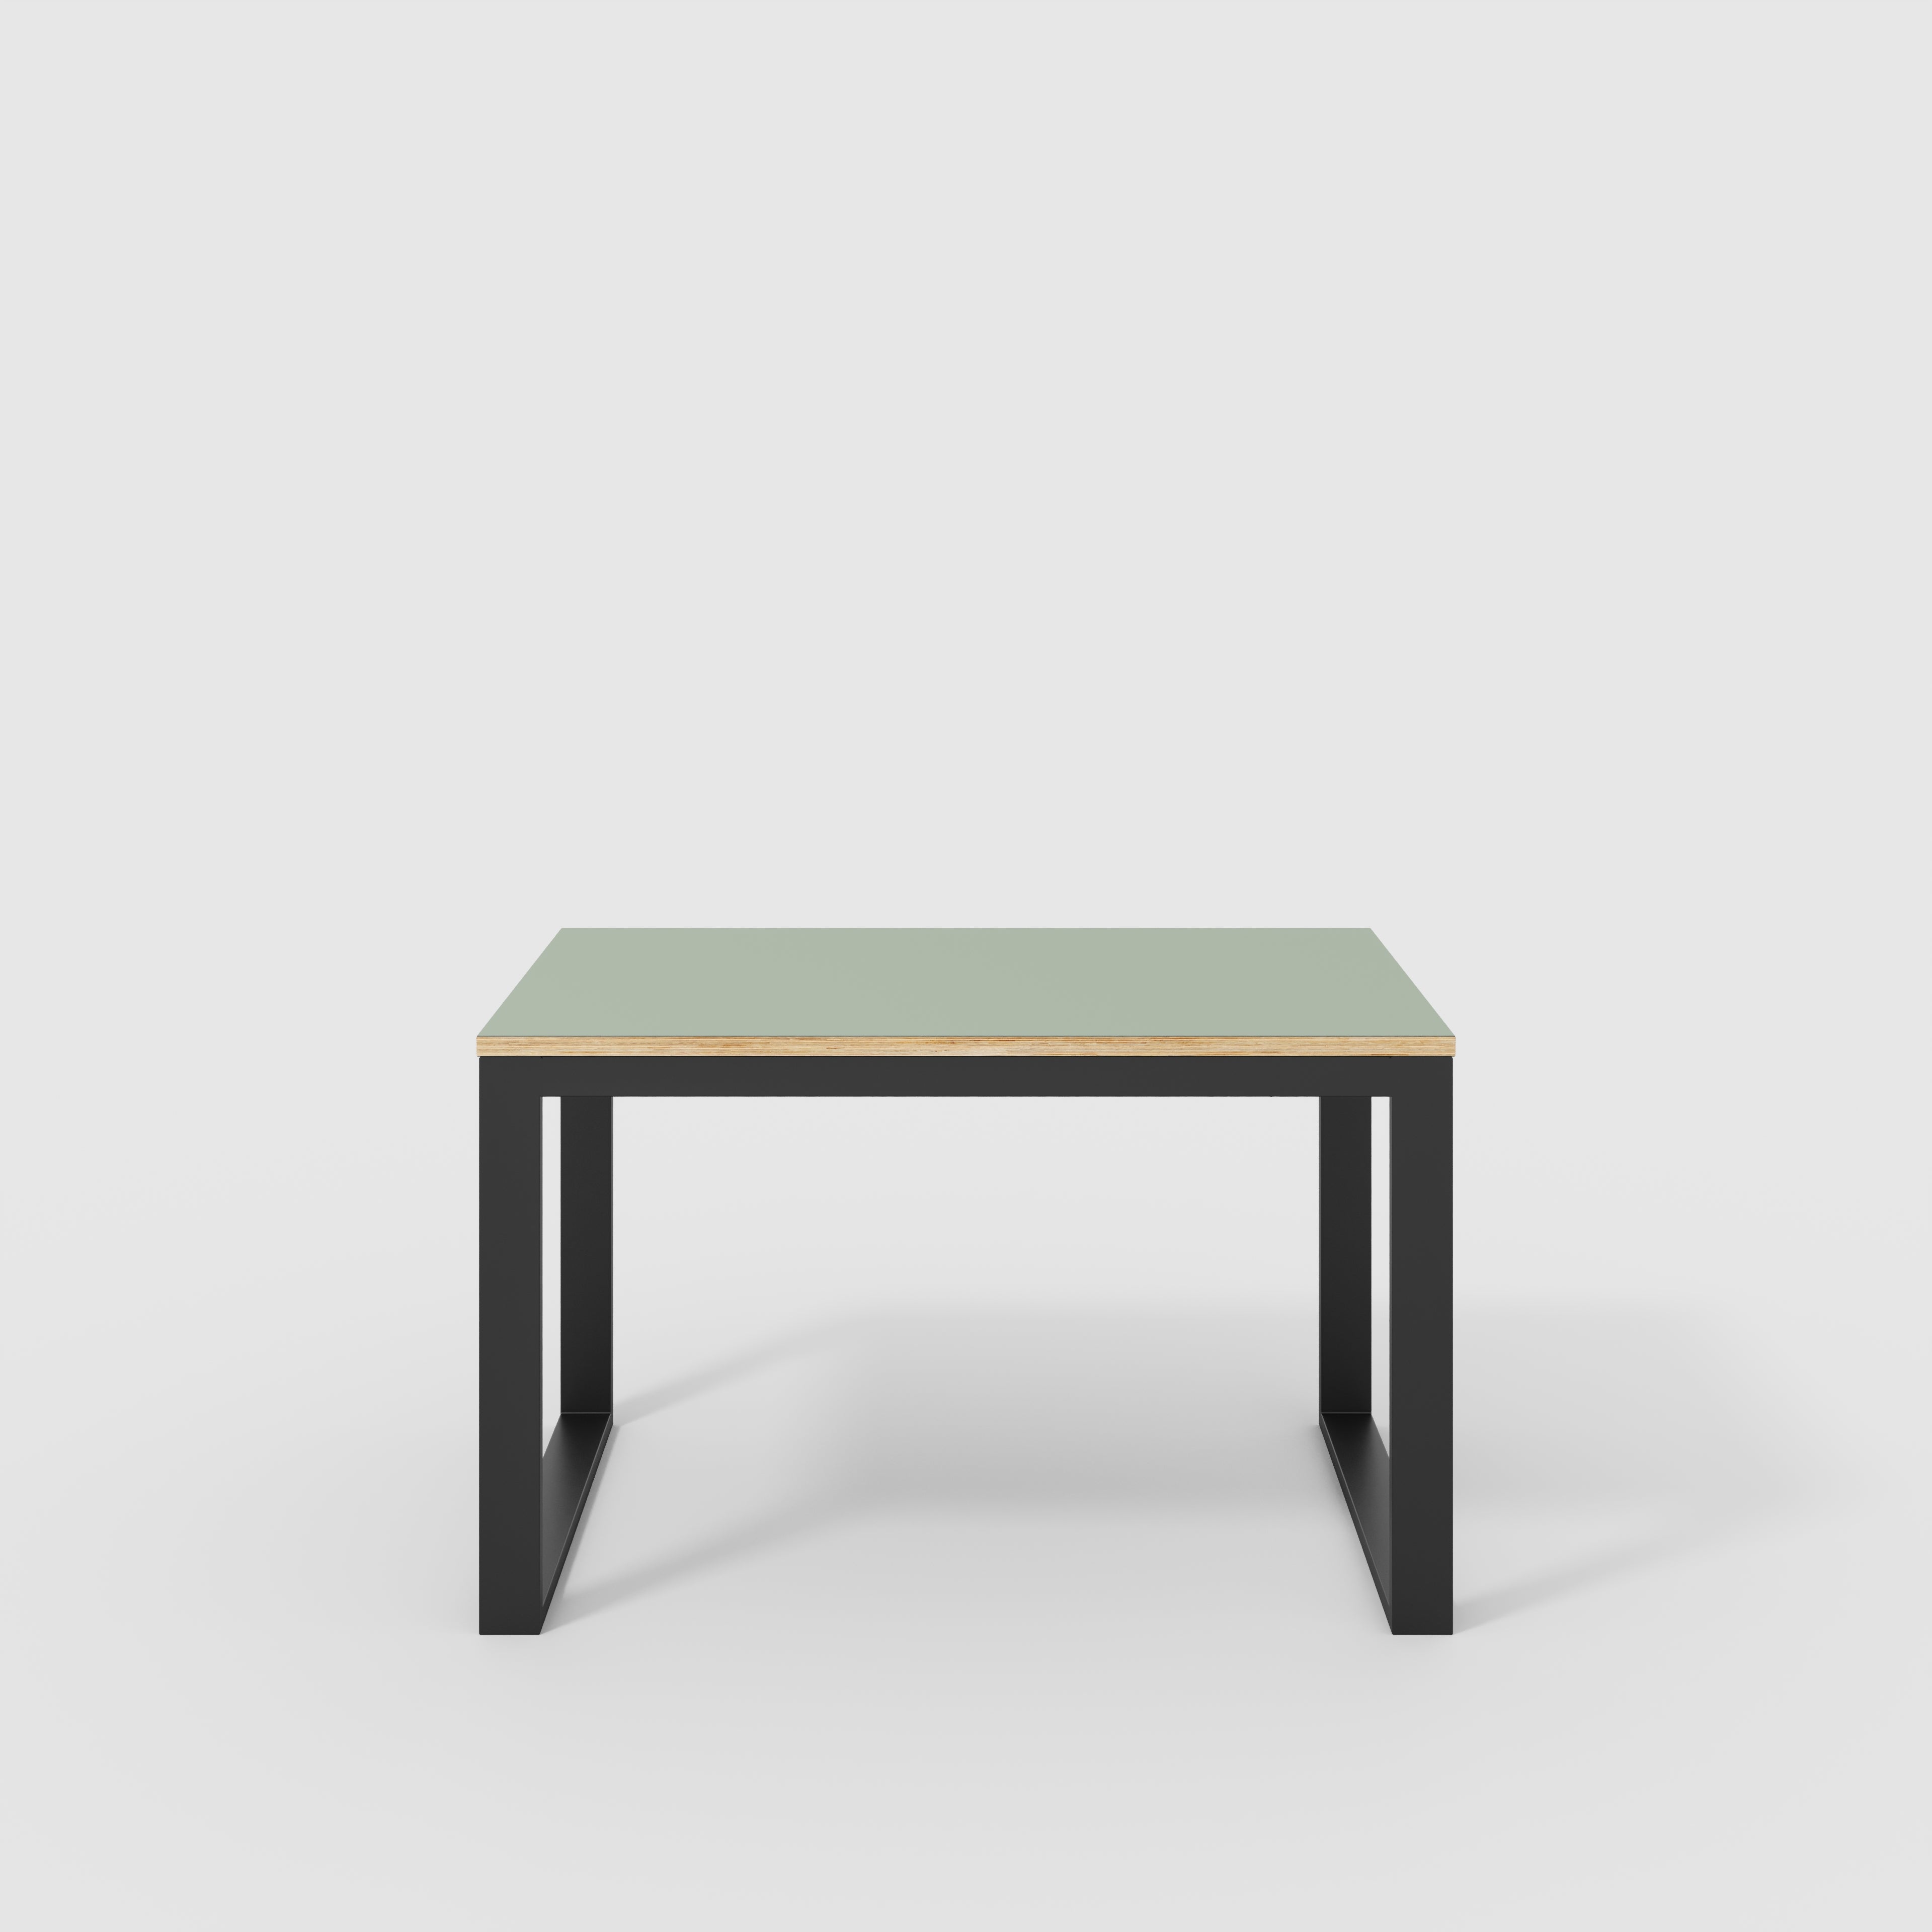 Table with Black Industrial Frame - Formica Green Slate - 1200(w) x 745(d) x 735(h)